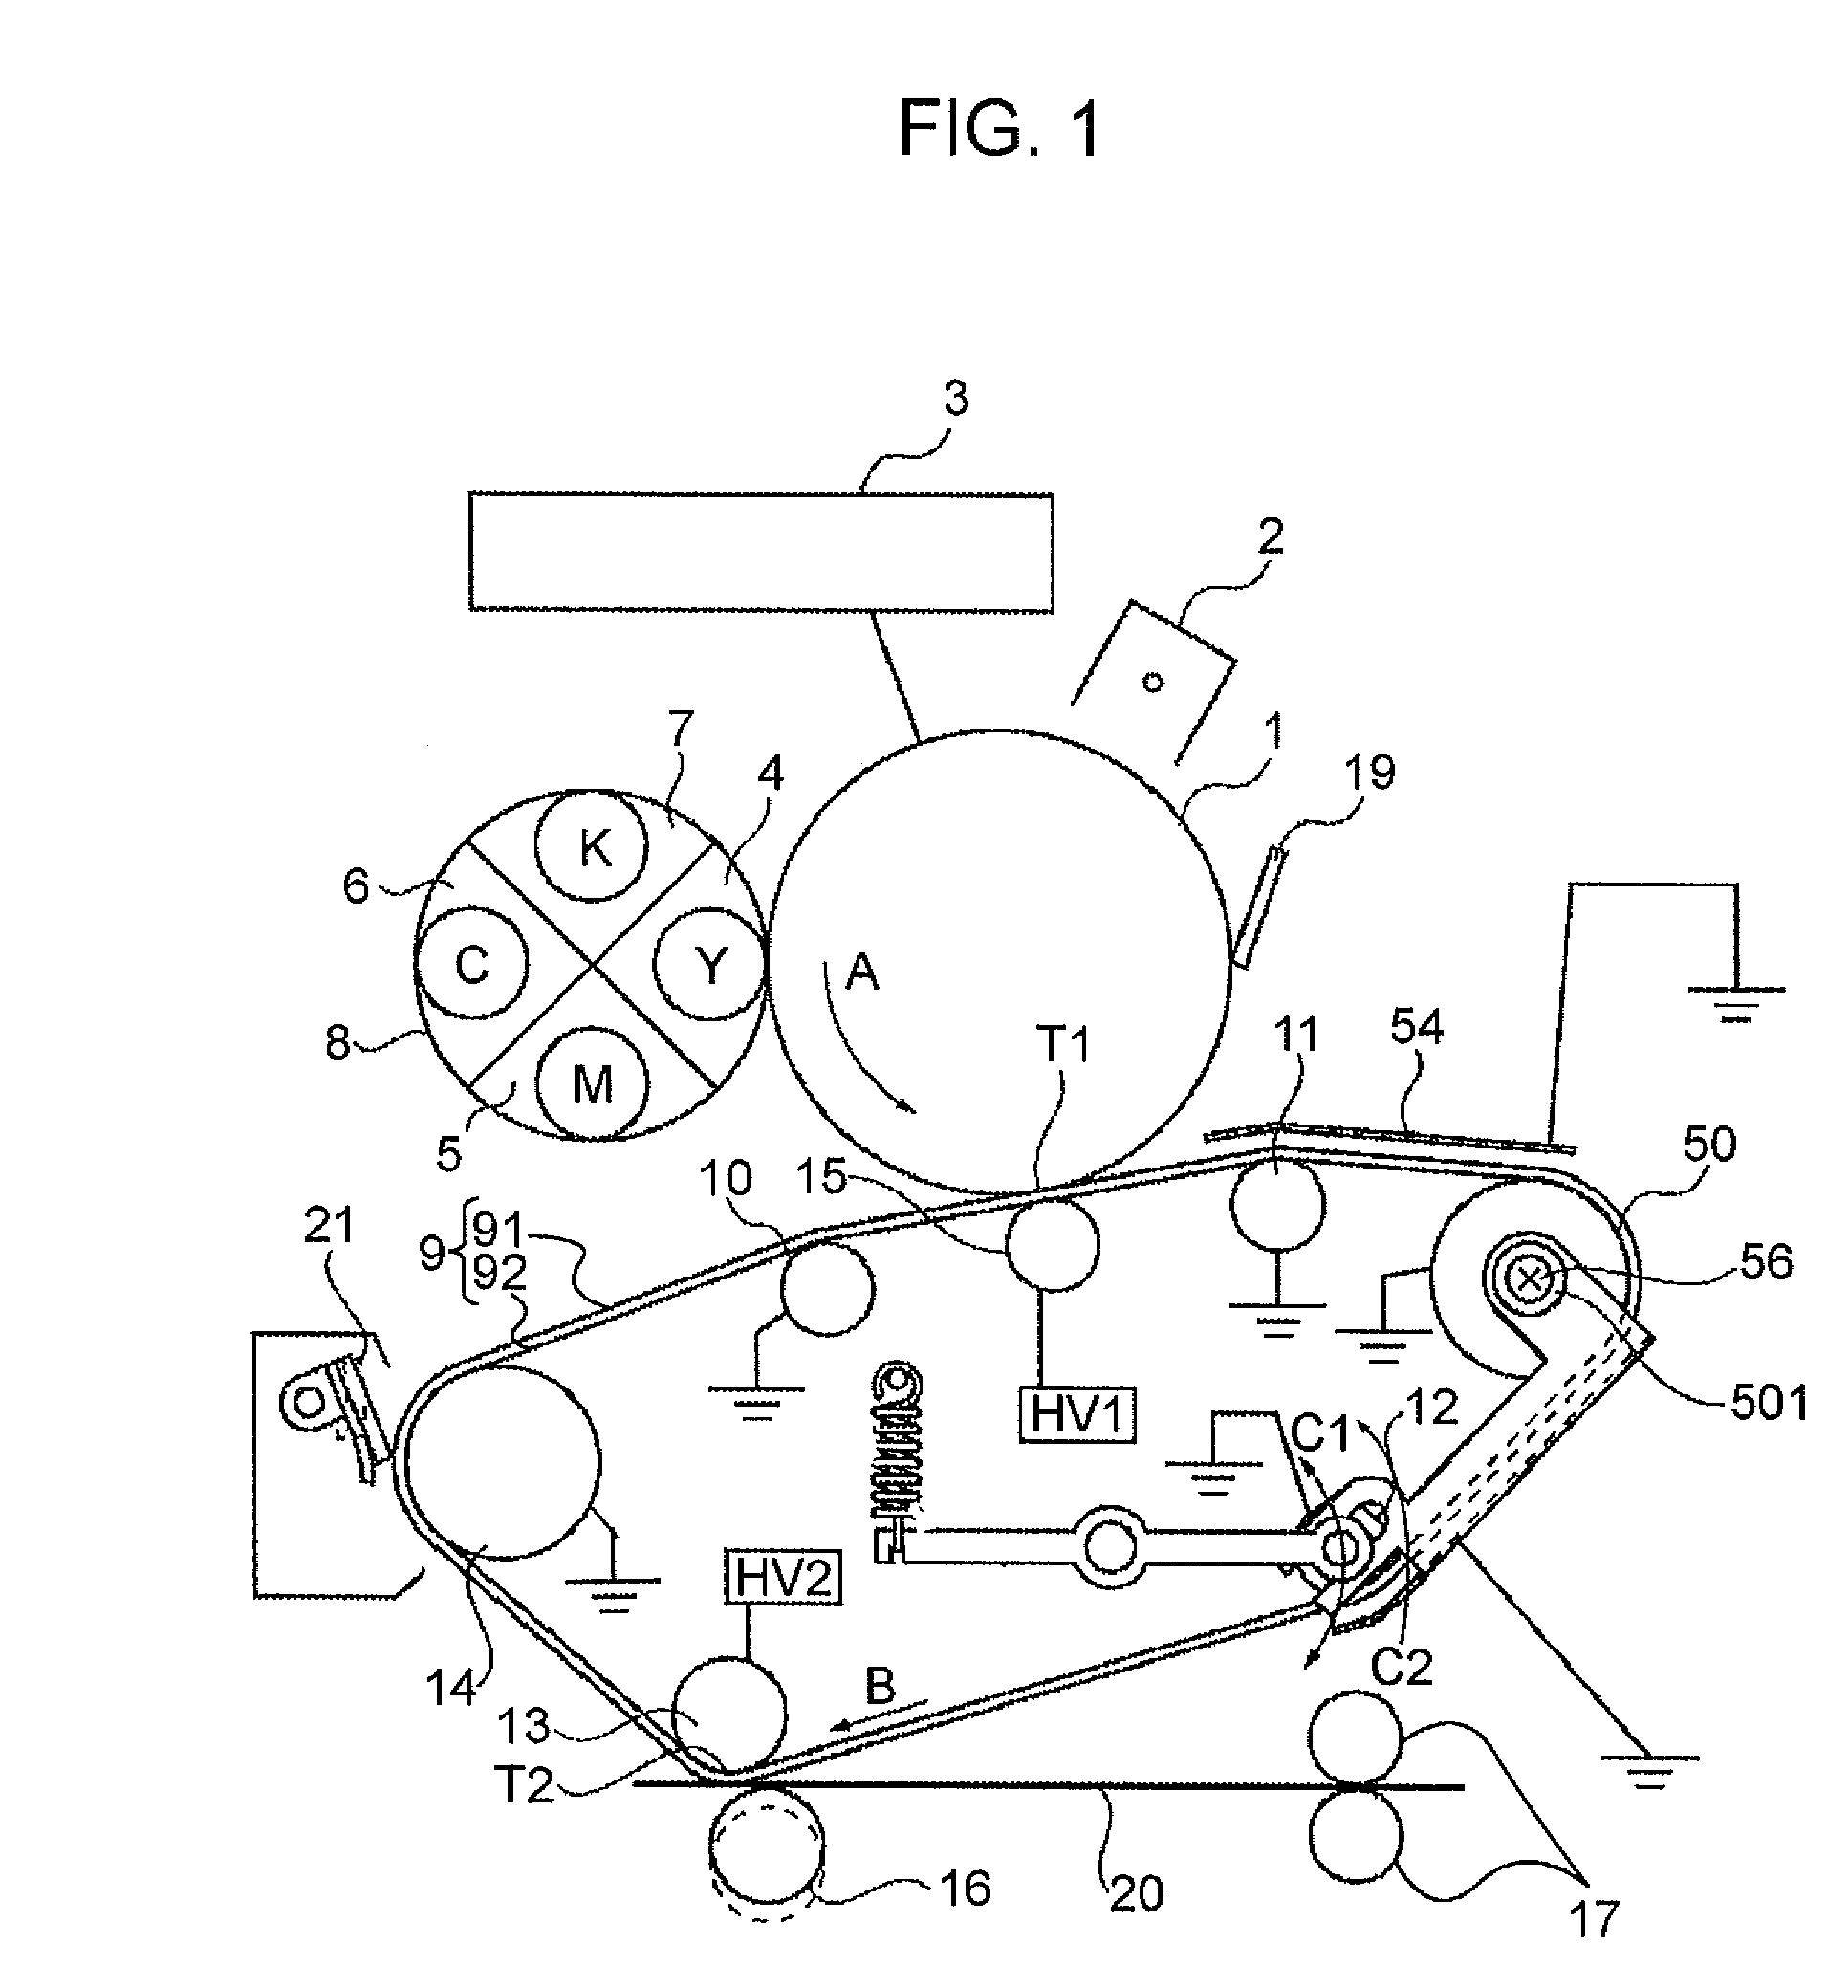 Image-forming apparatus having movable tensioner and electrode member that reduce toner scatter